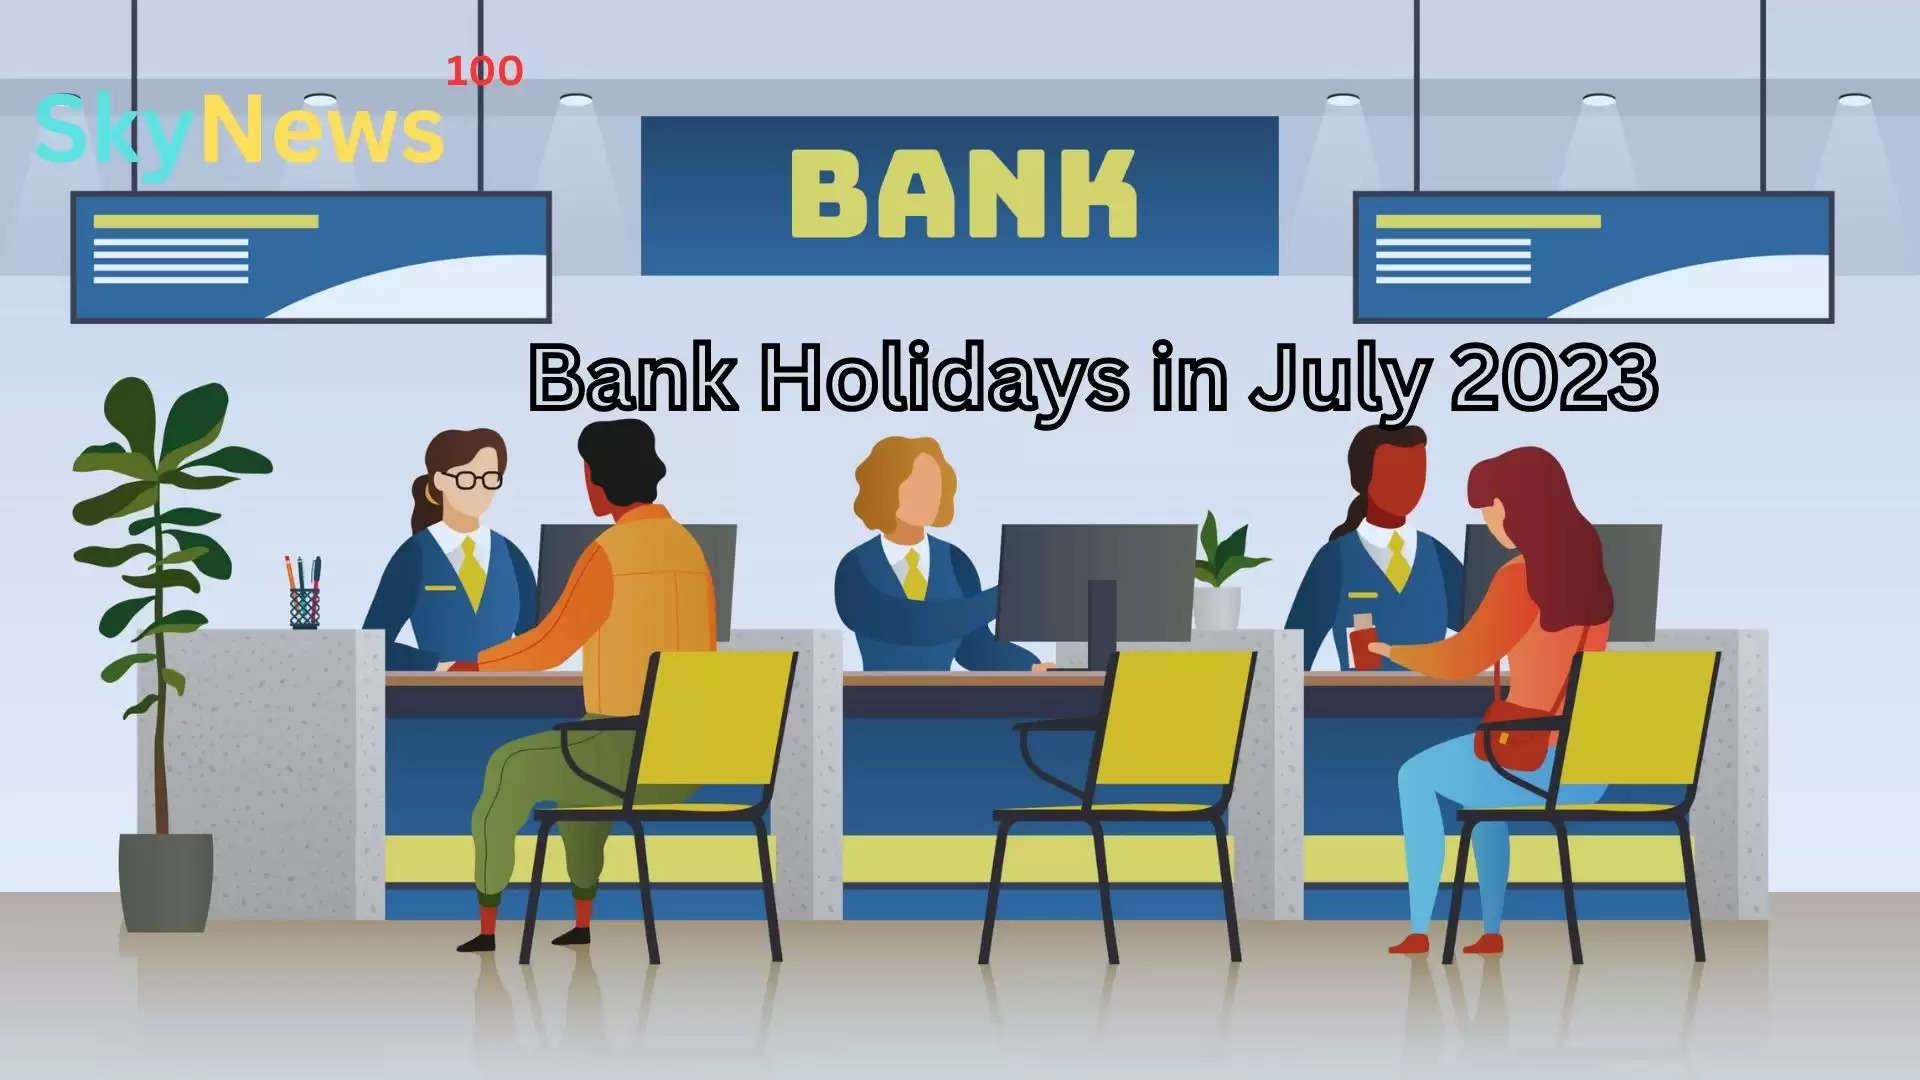 Bank Holidays in July 2023